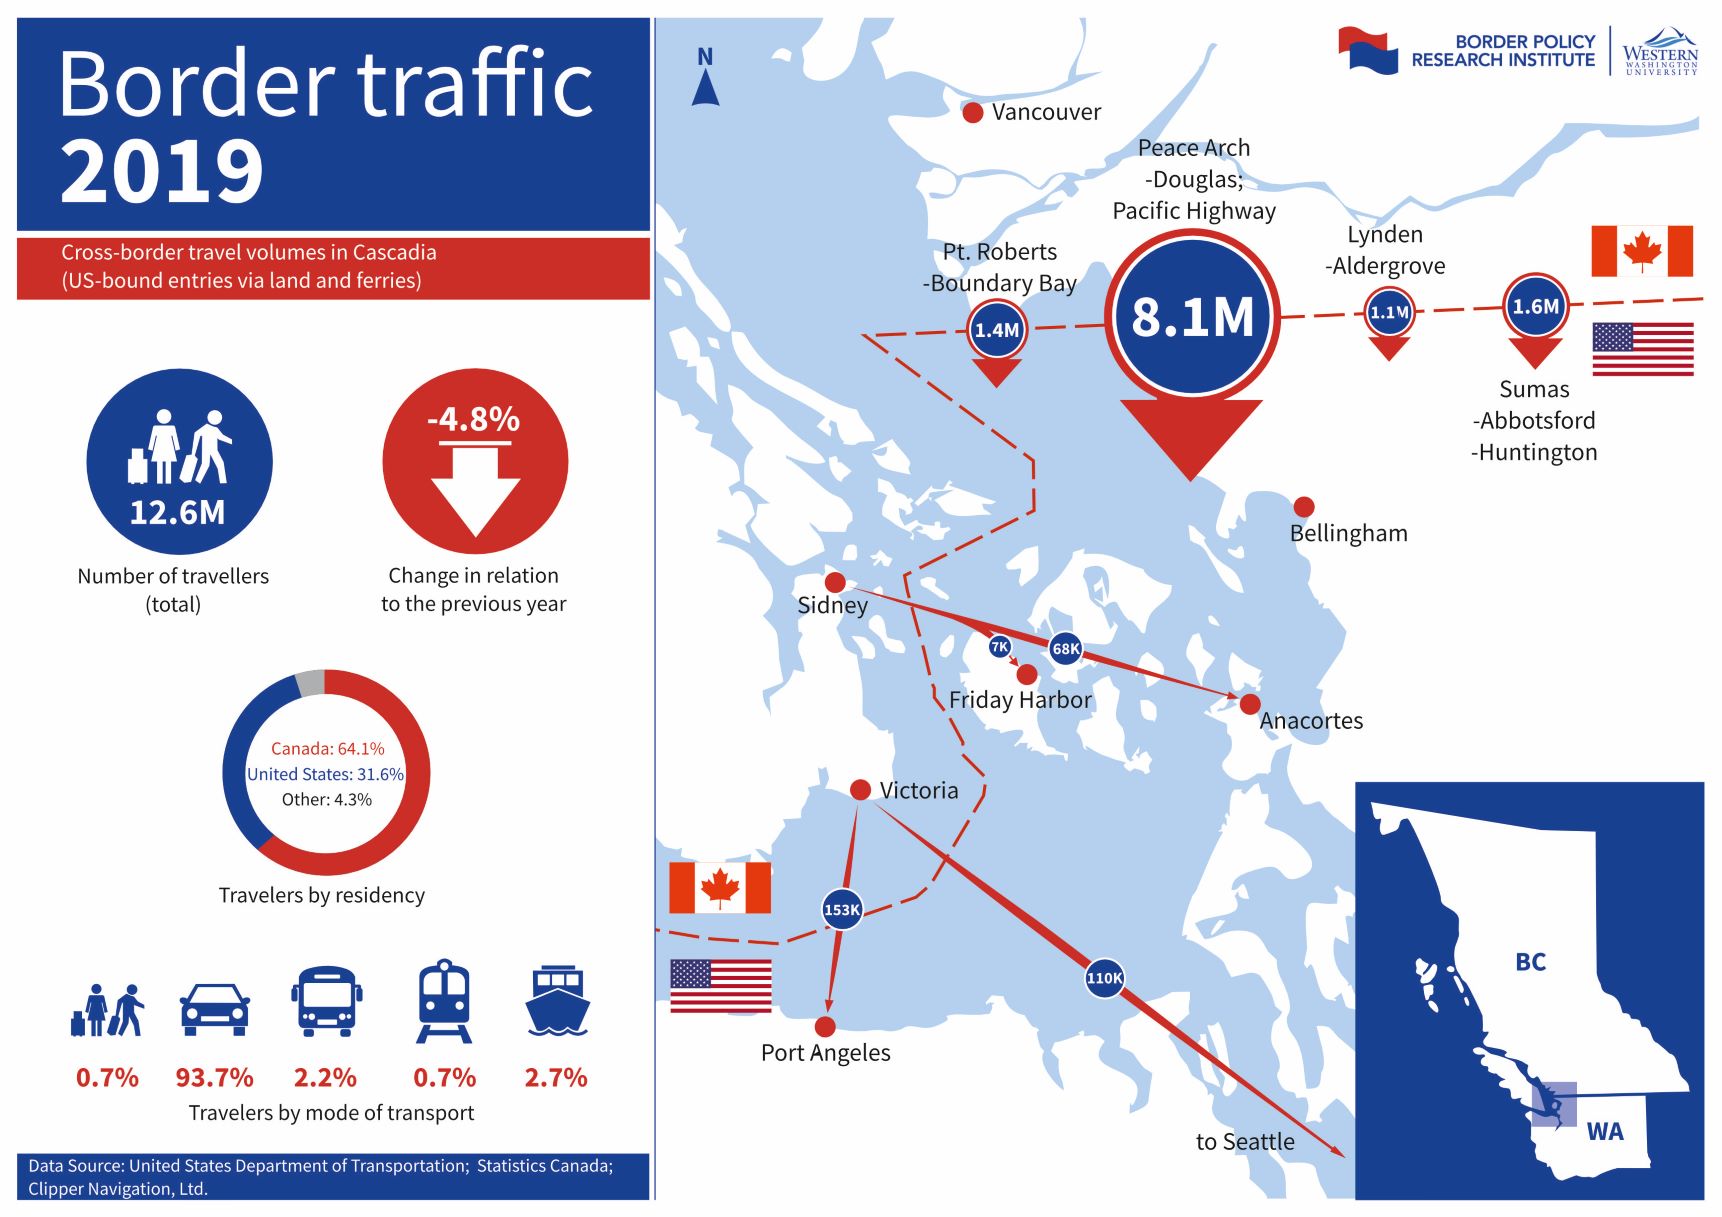 Infographic showing Border traffic volumes 2019